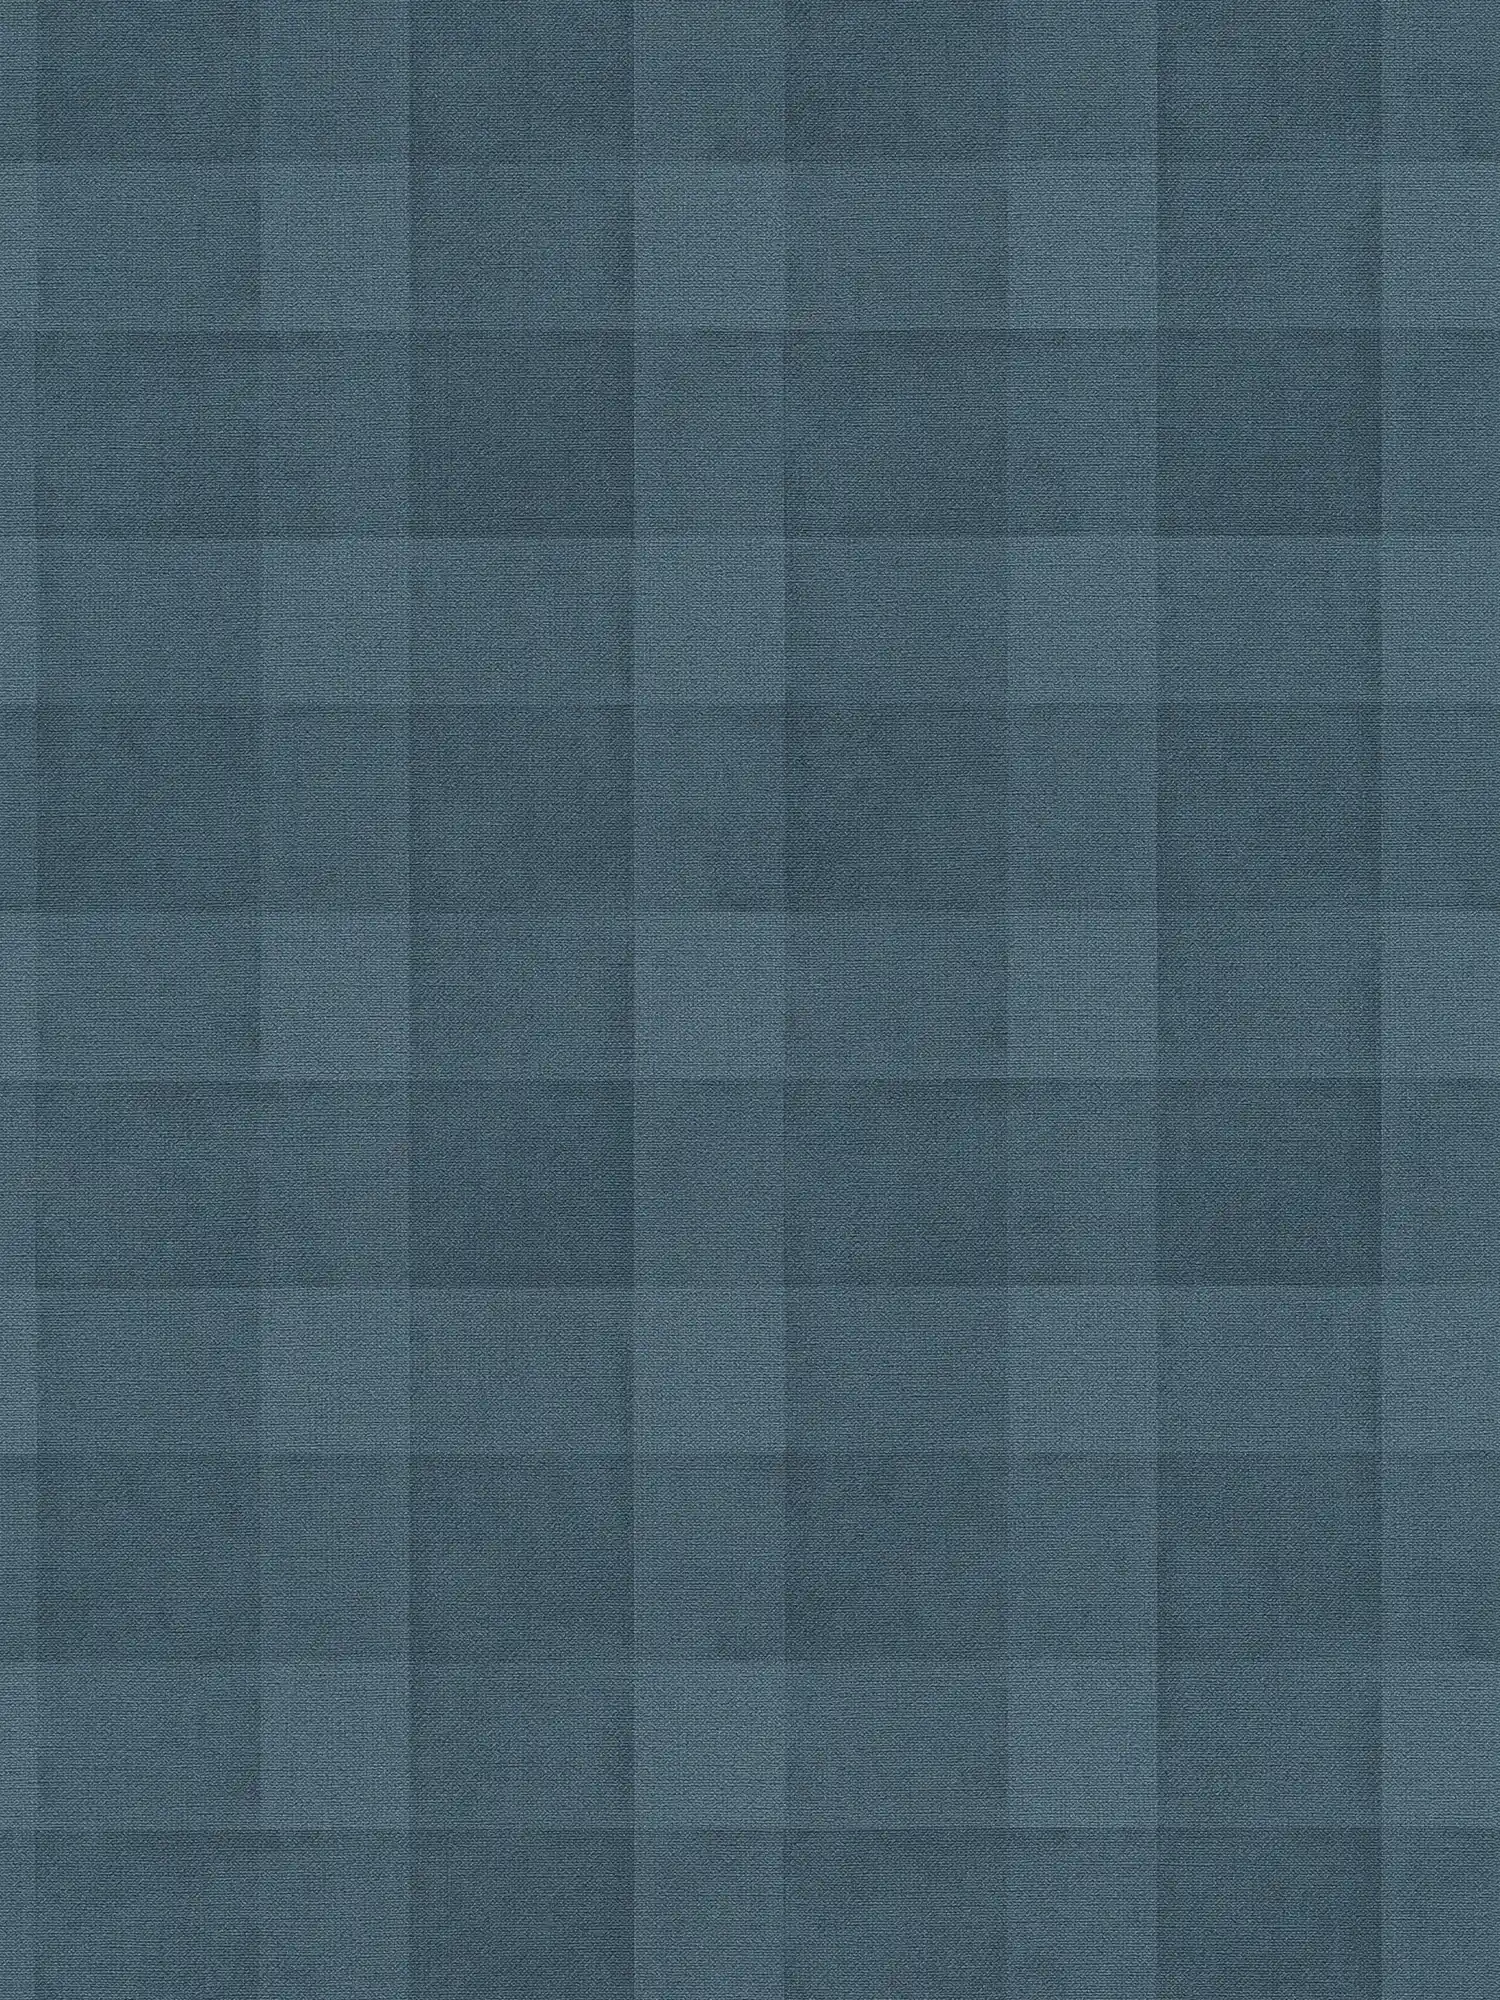 PVC-free wallpaper with graphic check pattern - blue
